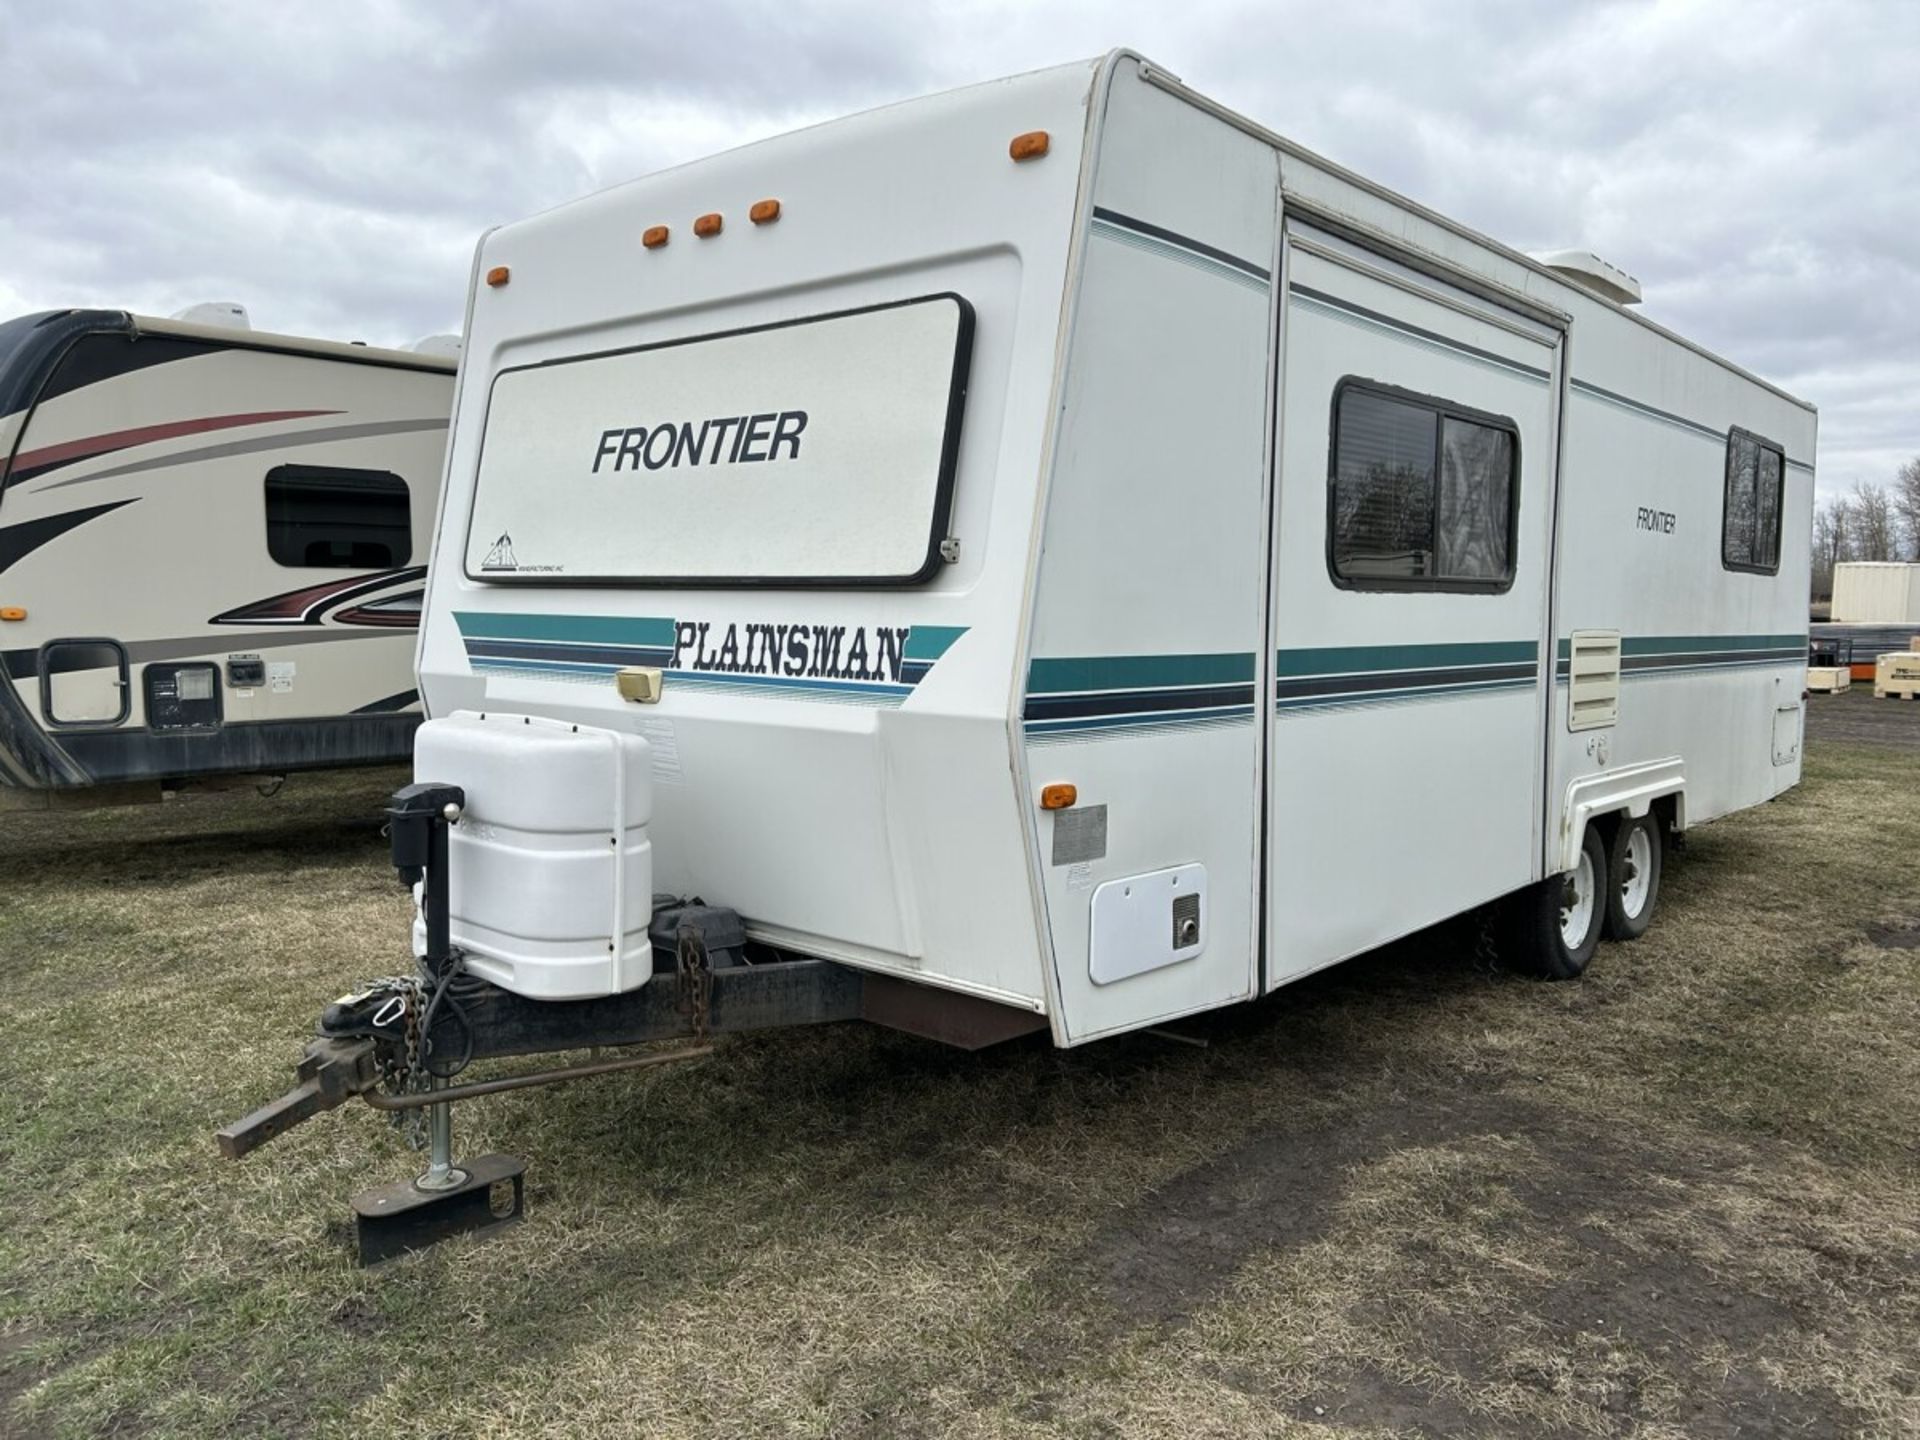 1999 FRONTIER PLAINSMAN T264SL 25 FT HOLIDAY TRAILER, SLIDE OUT, NOTE: CUSTOM STEP SOLD SEPERATELY - Image 2 of 17